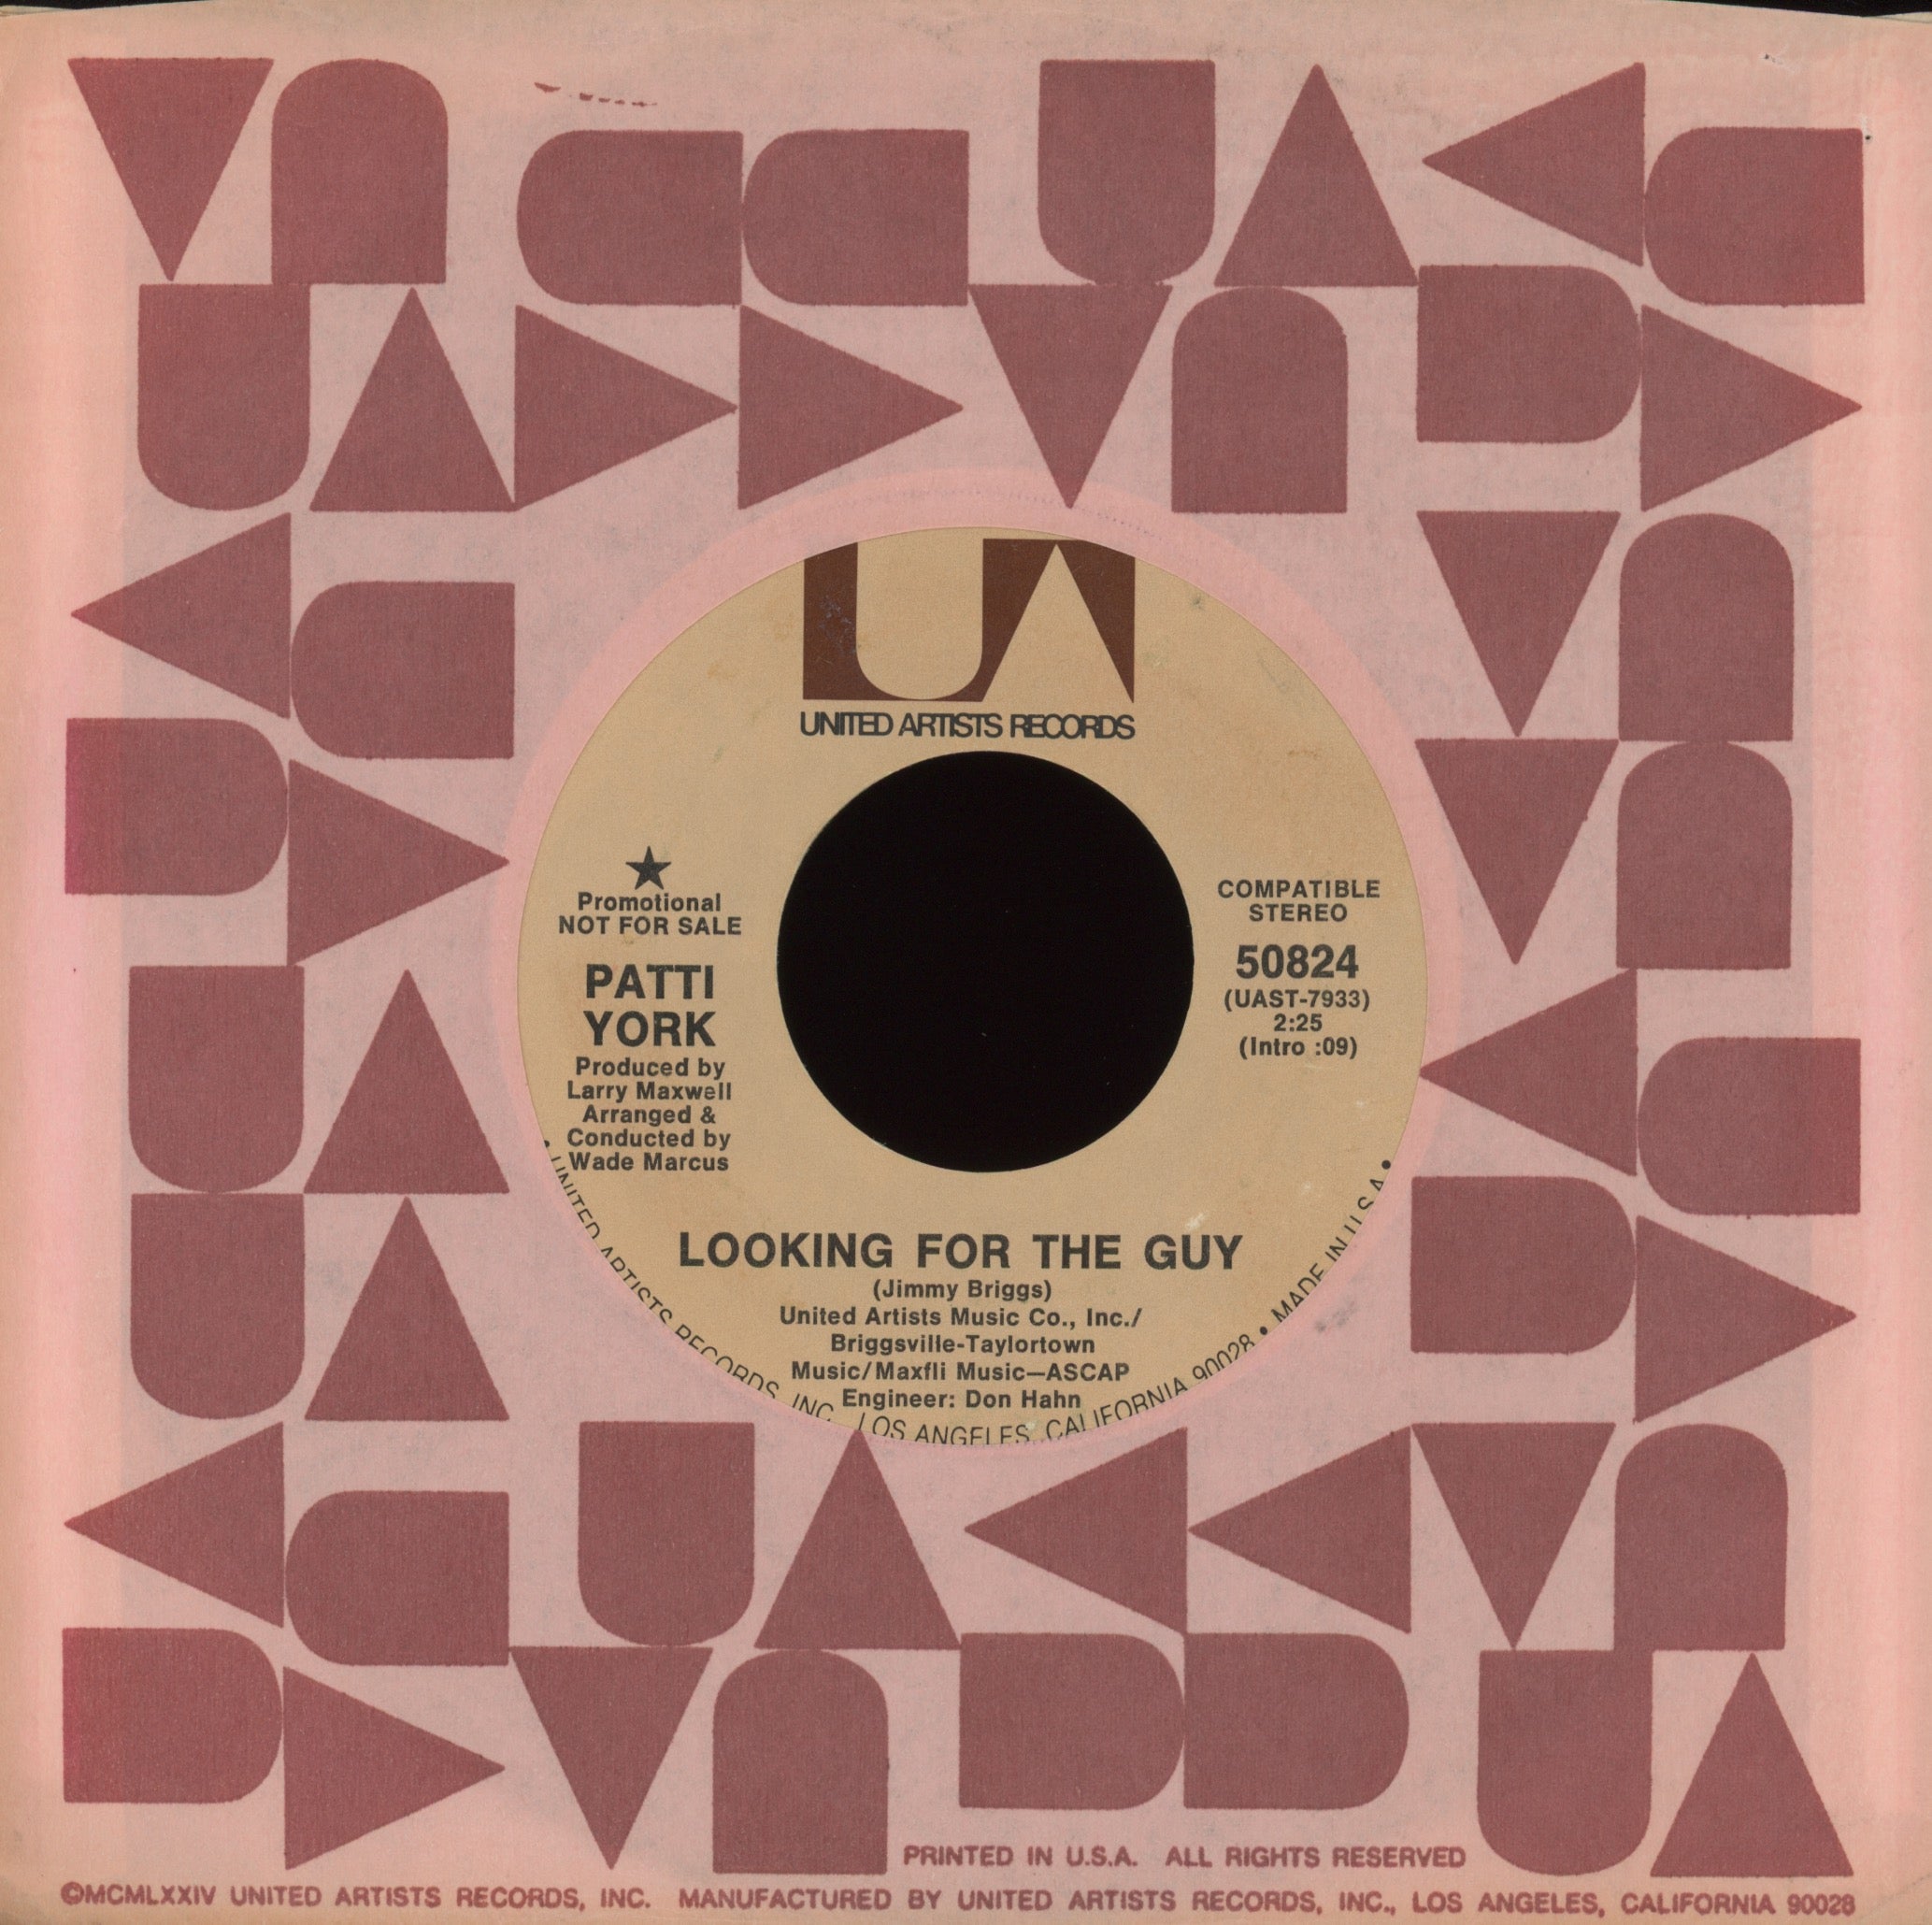 Patti York - He's Coming In The Morning on UA Promo Crossover Soul 45